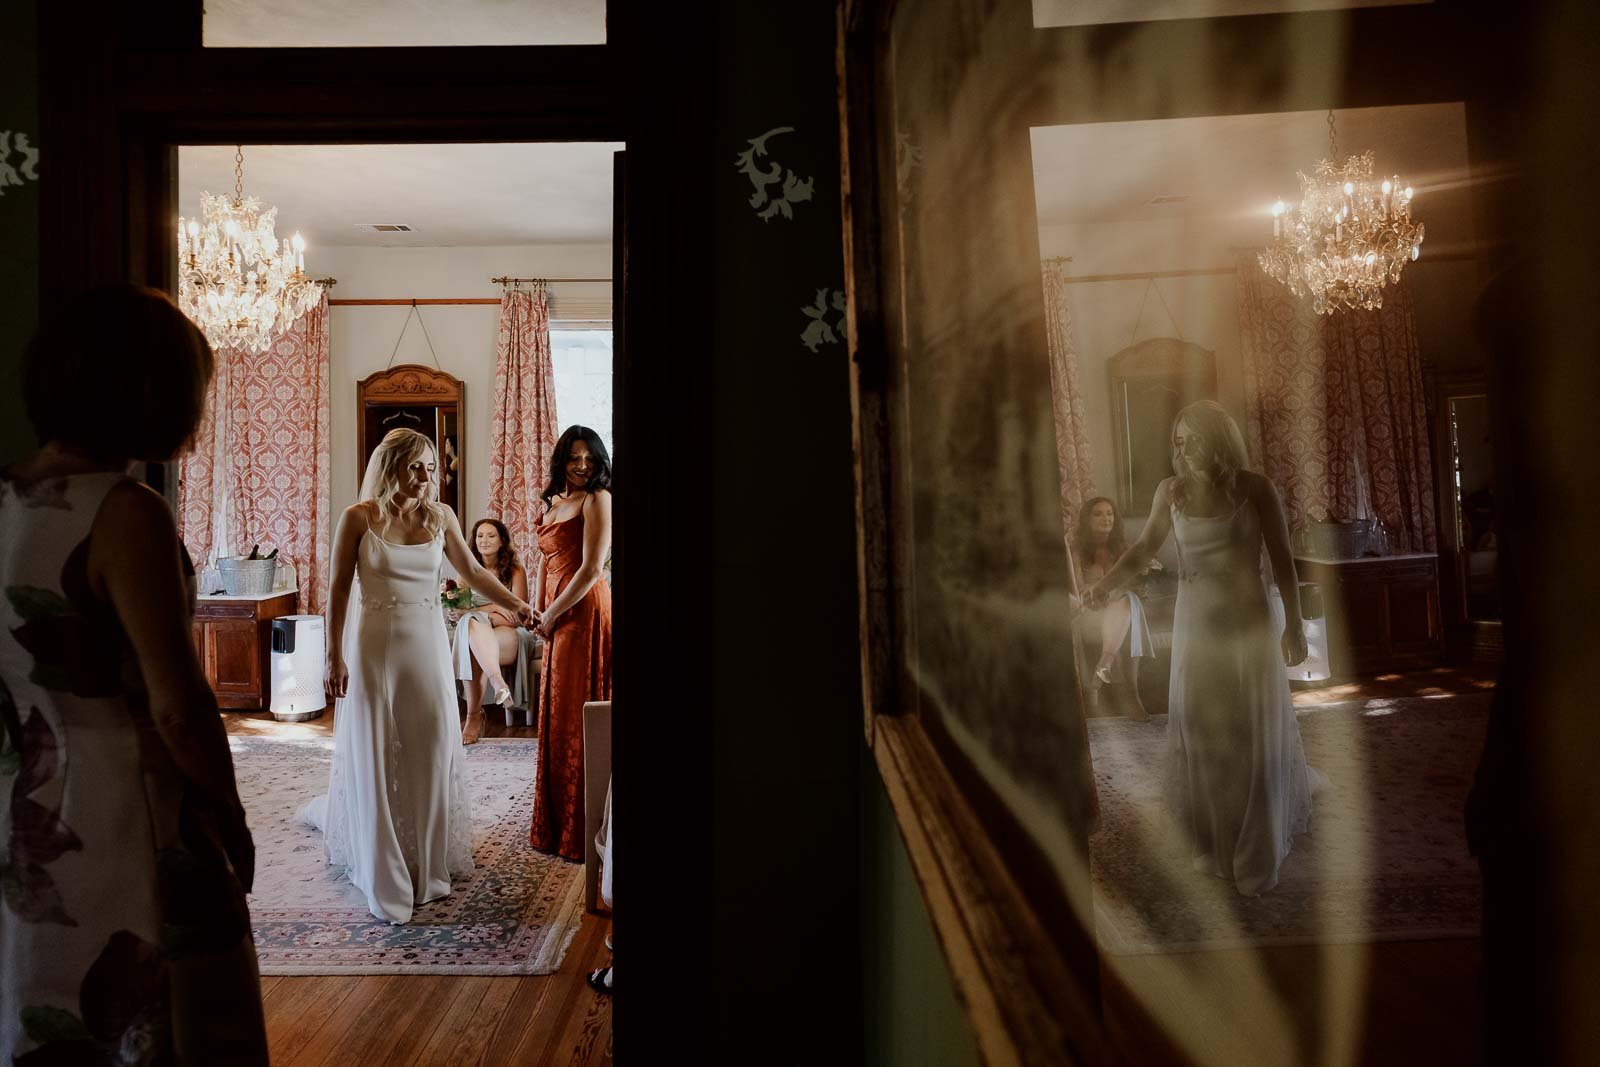 The bride holds a bridesmaid's hand as she is shown in the reflection and her mother on the left.